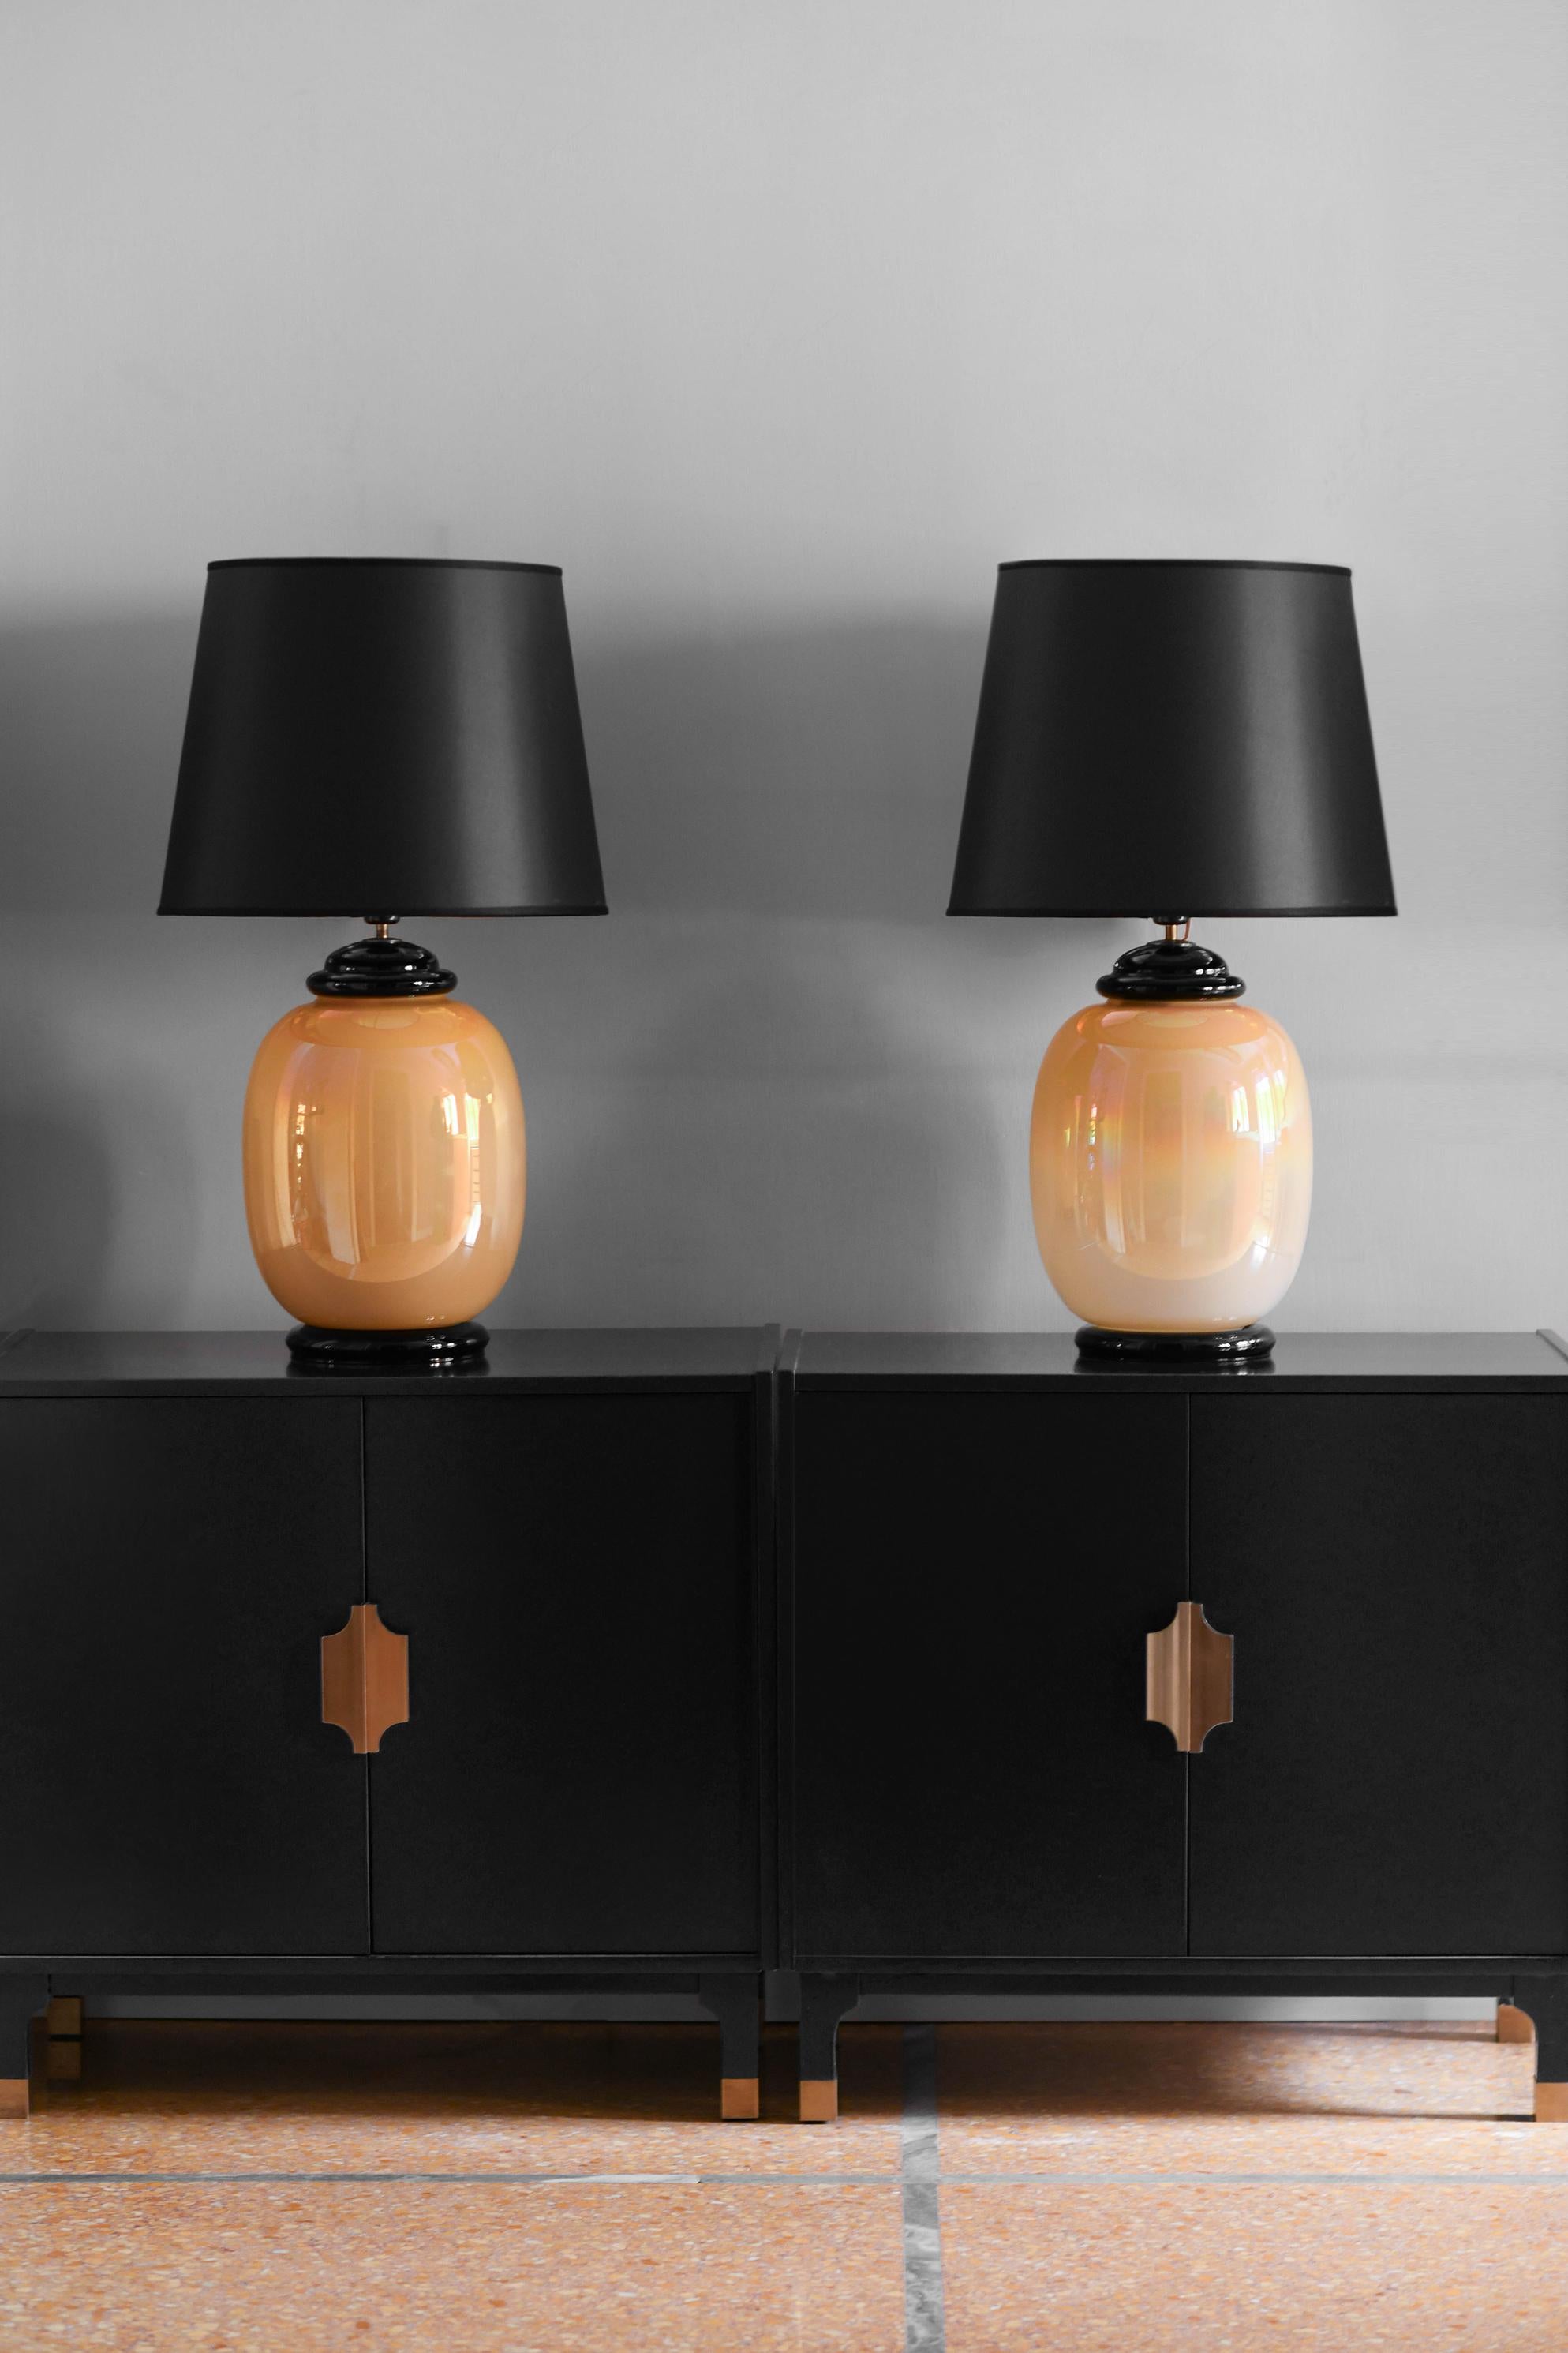 Pair of Tommaso Barbi lamps in opaline Murano glass complete with black chinè fabric lampshade, Italy 1980.
Dimensions of the single lamp: 45 w x 76 h x 45 d cm
Sold as set of 2.